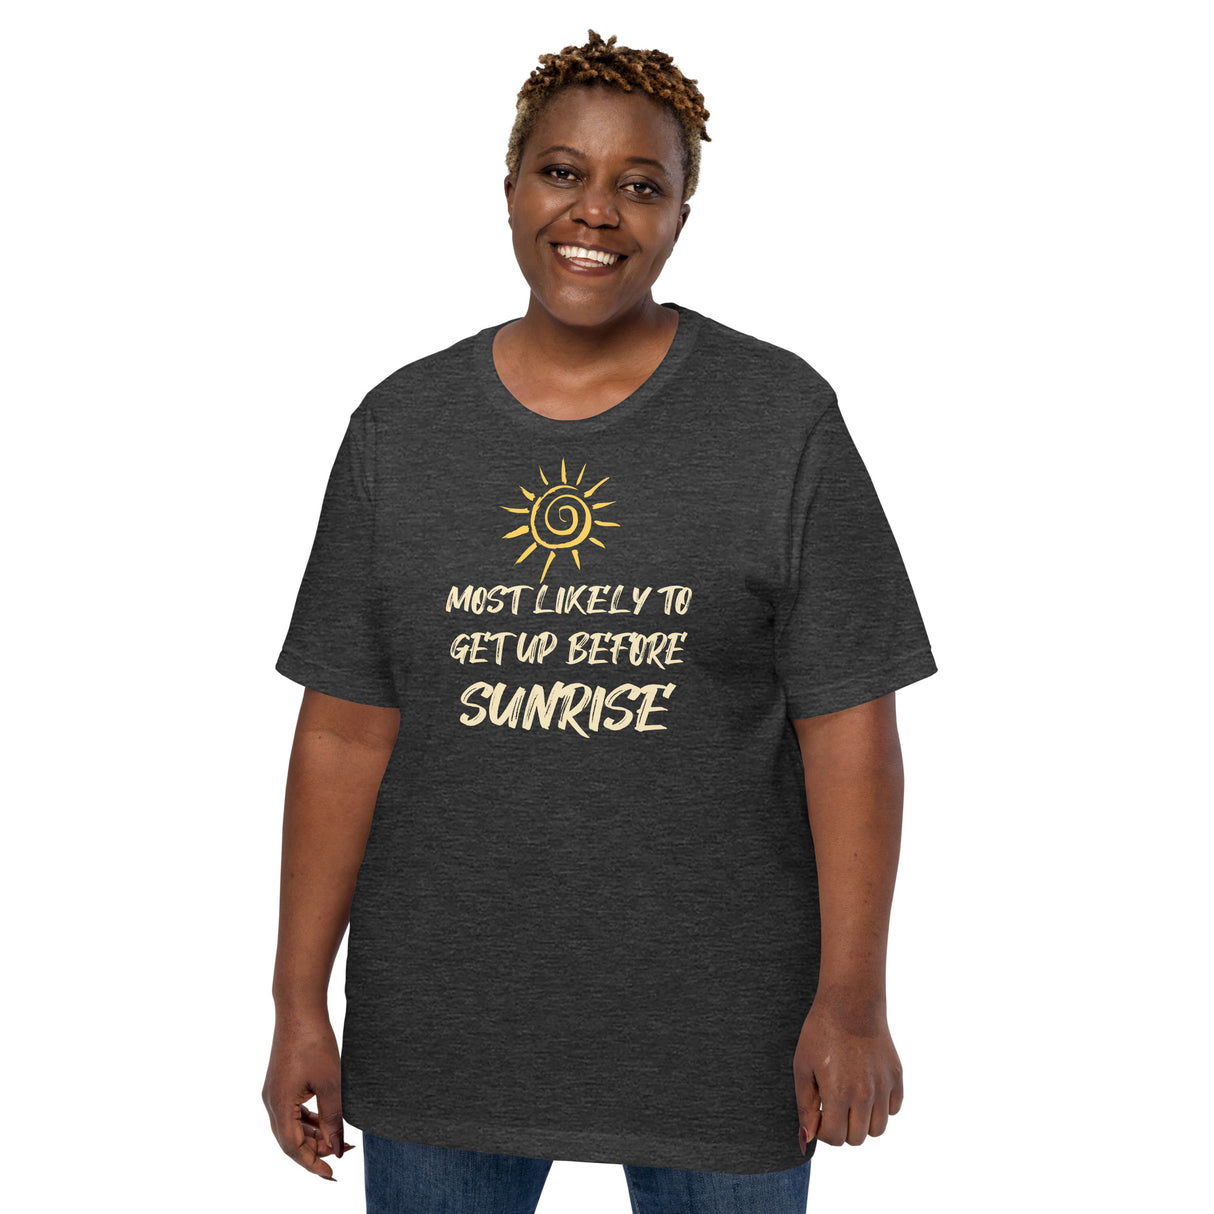 Most Likely To Get Up Before Sunrise Women's Shirt